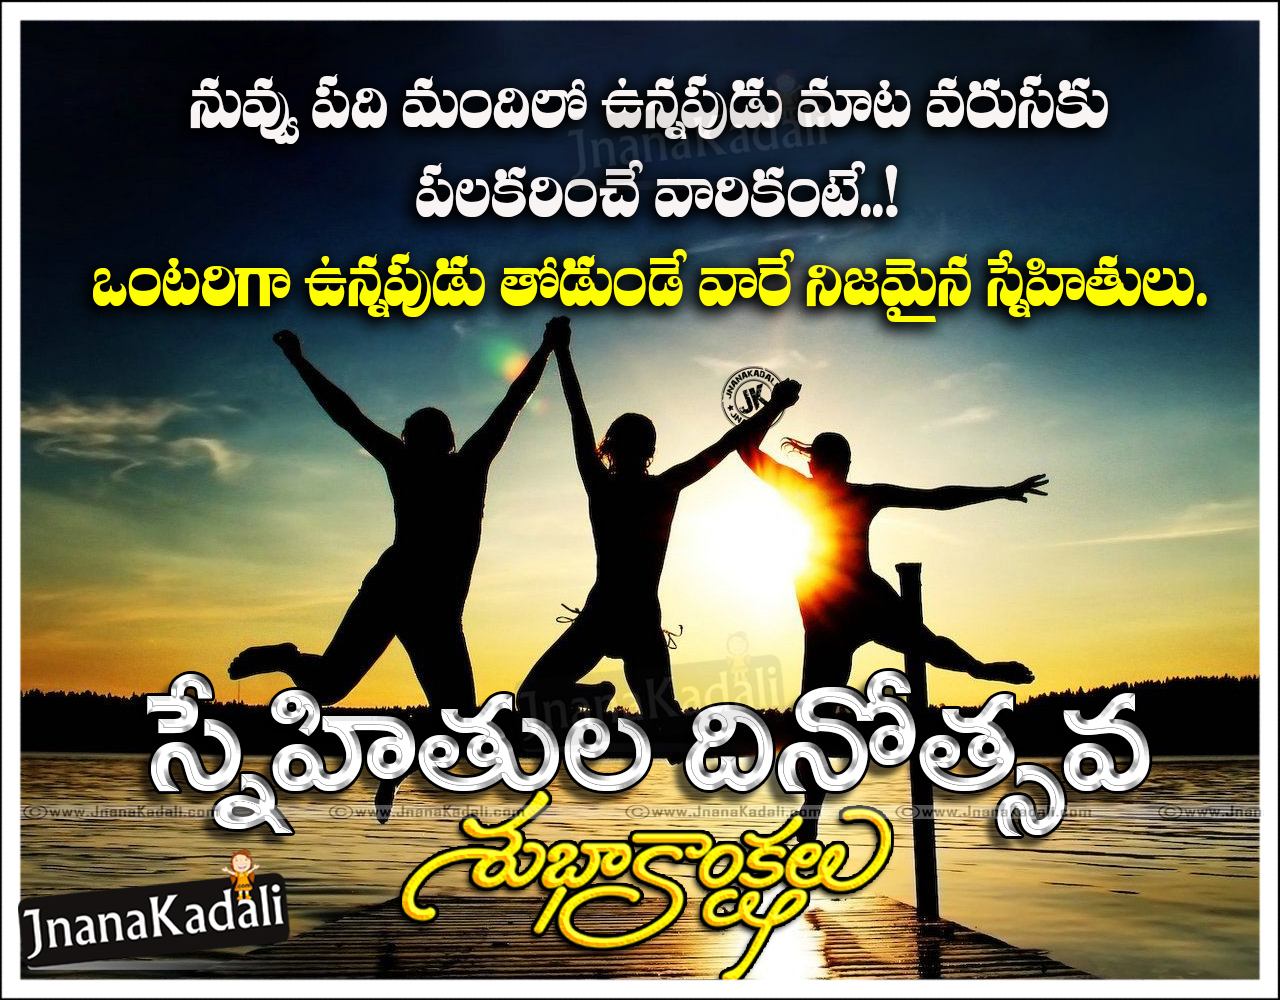 Friendship day telugu quotes Wishes Greetings Images Wallpapers ...